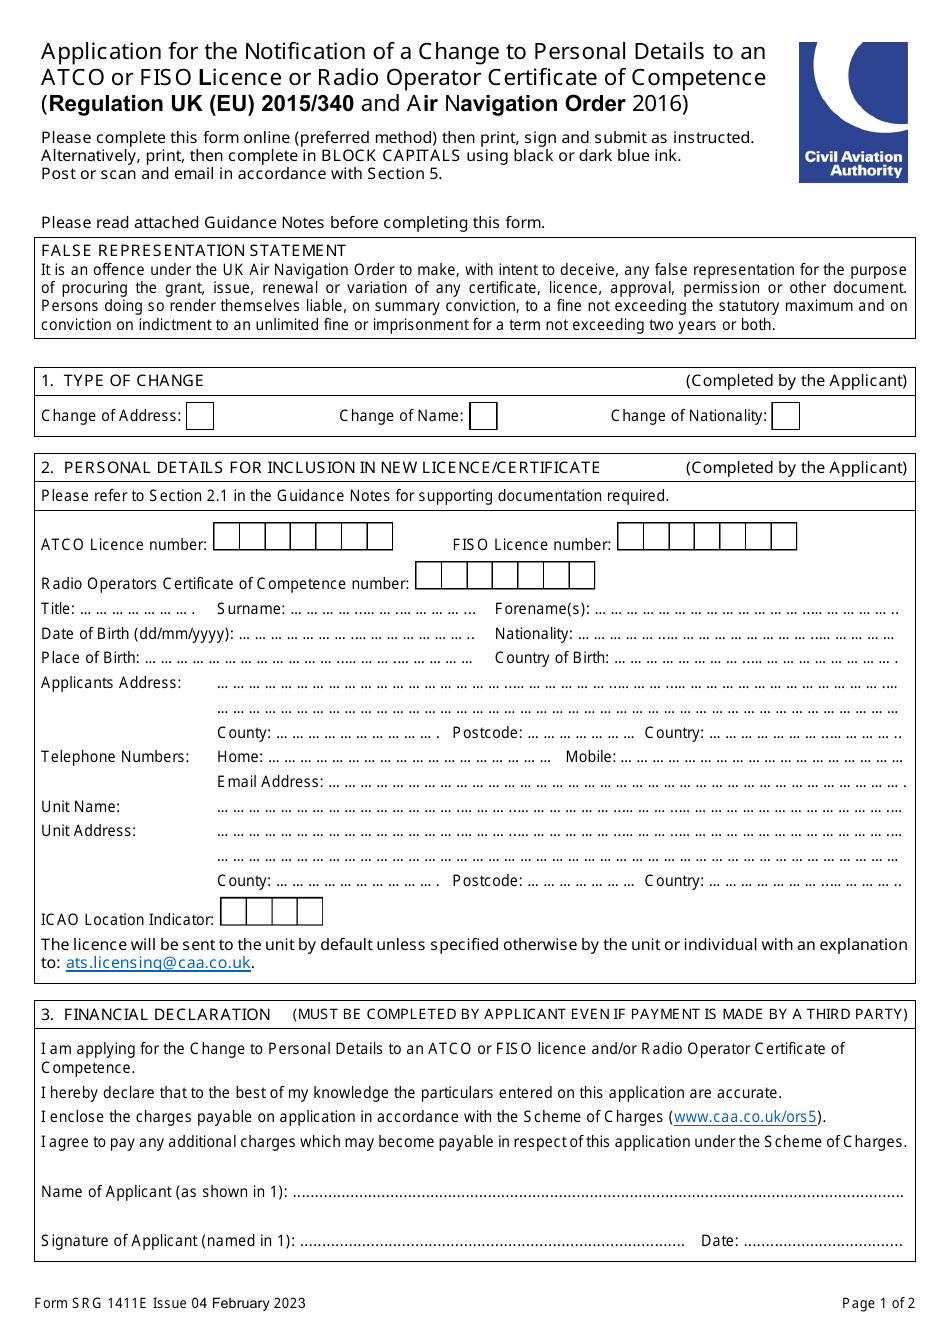 Form SRG1411E Application for the Notification of a Change to Personal Details to an Atco or Fiso Licence or Radio Operator Certificate of Competence - United Kingdom, Page 1